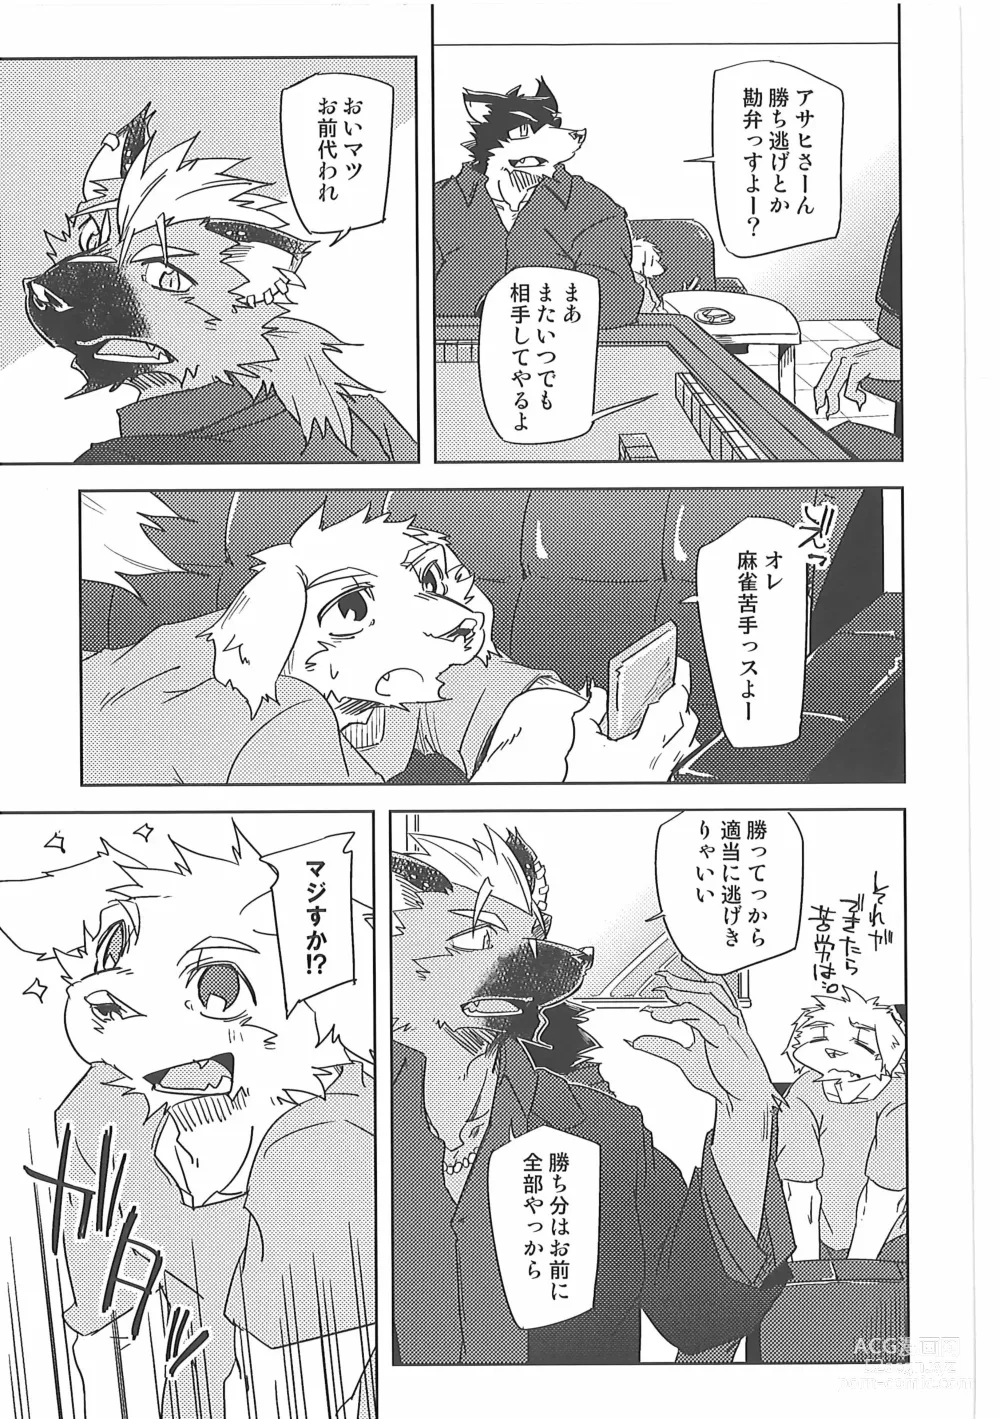 Page 5 of doujinshi Water under The Bridge 1